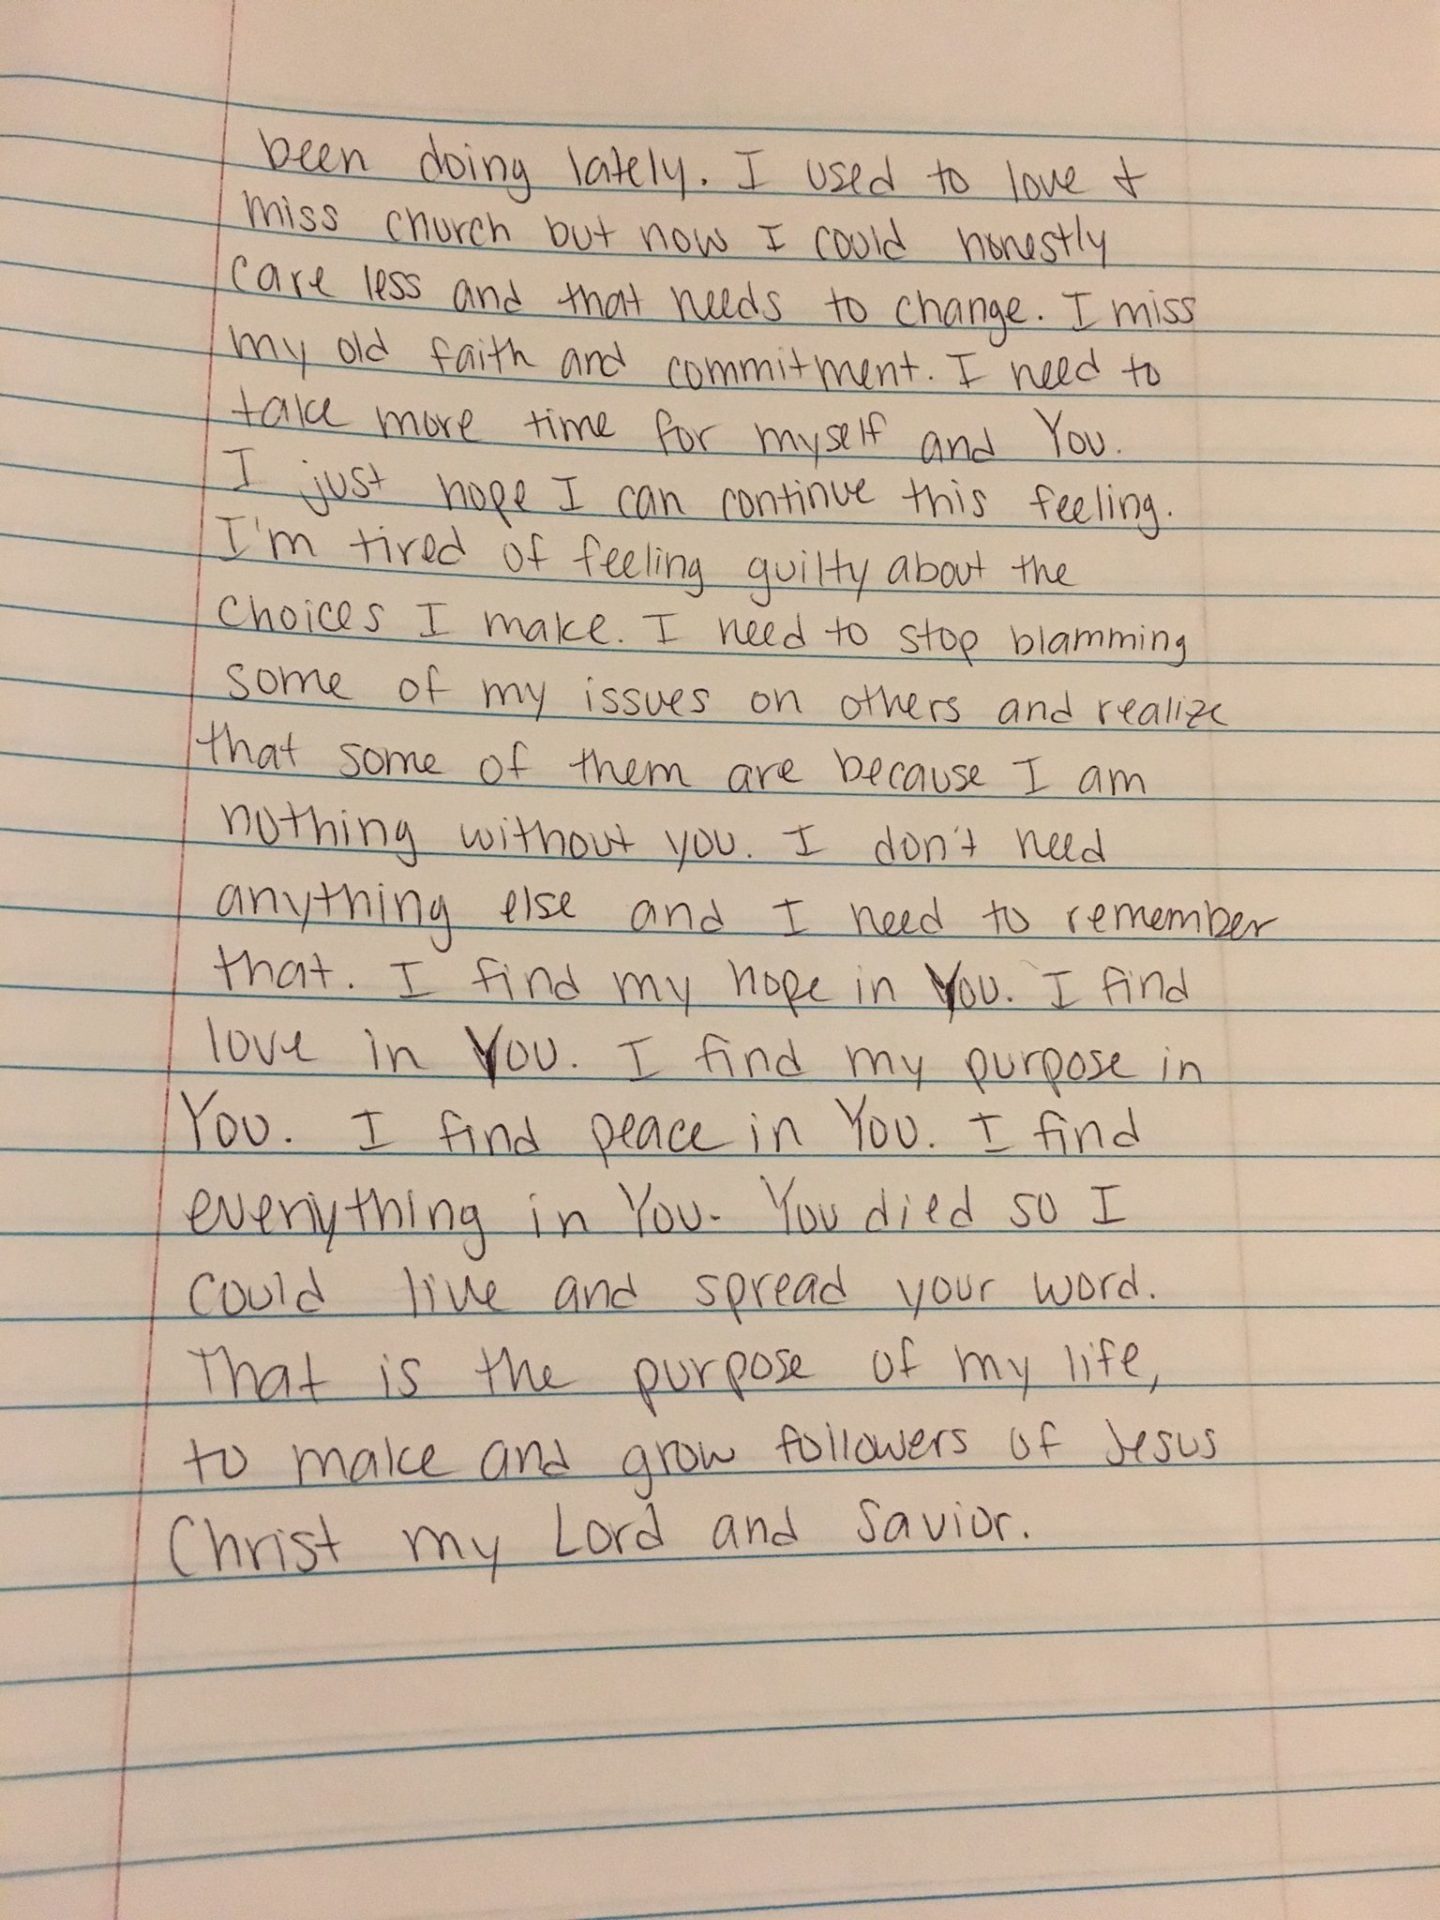 A Teenage Girl's Diary Entry on Love